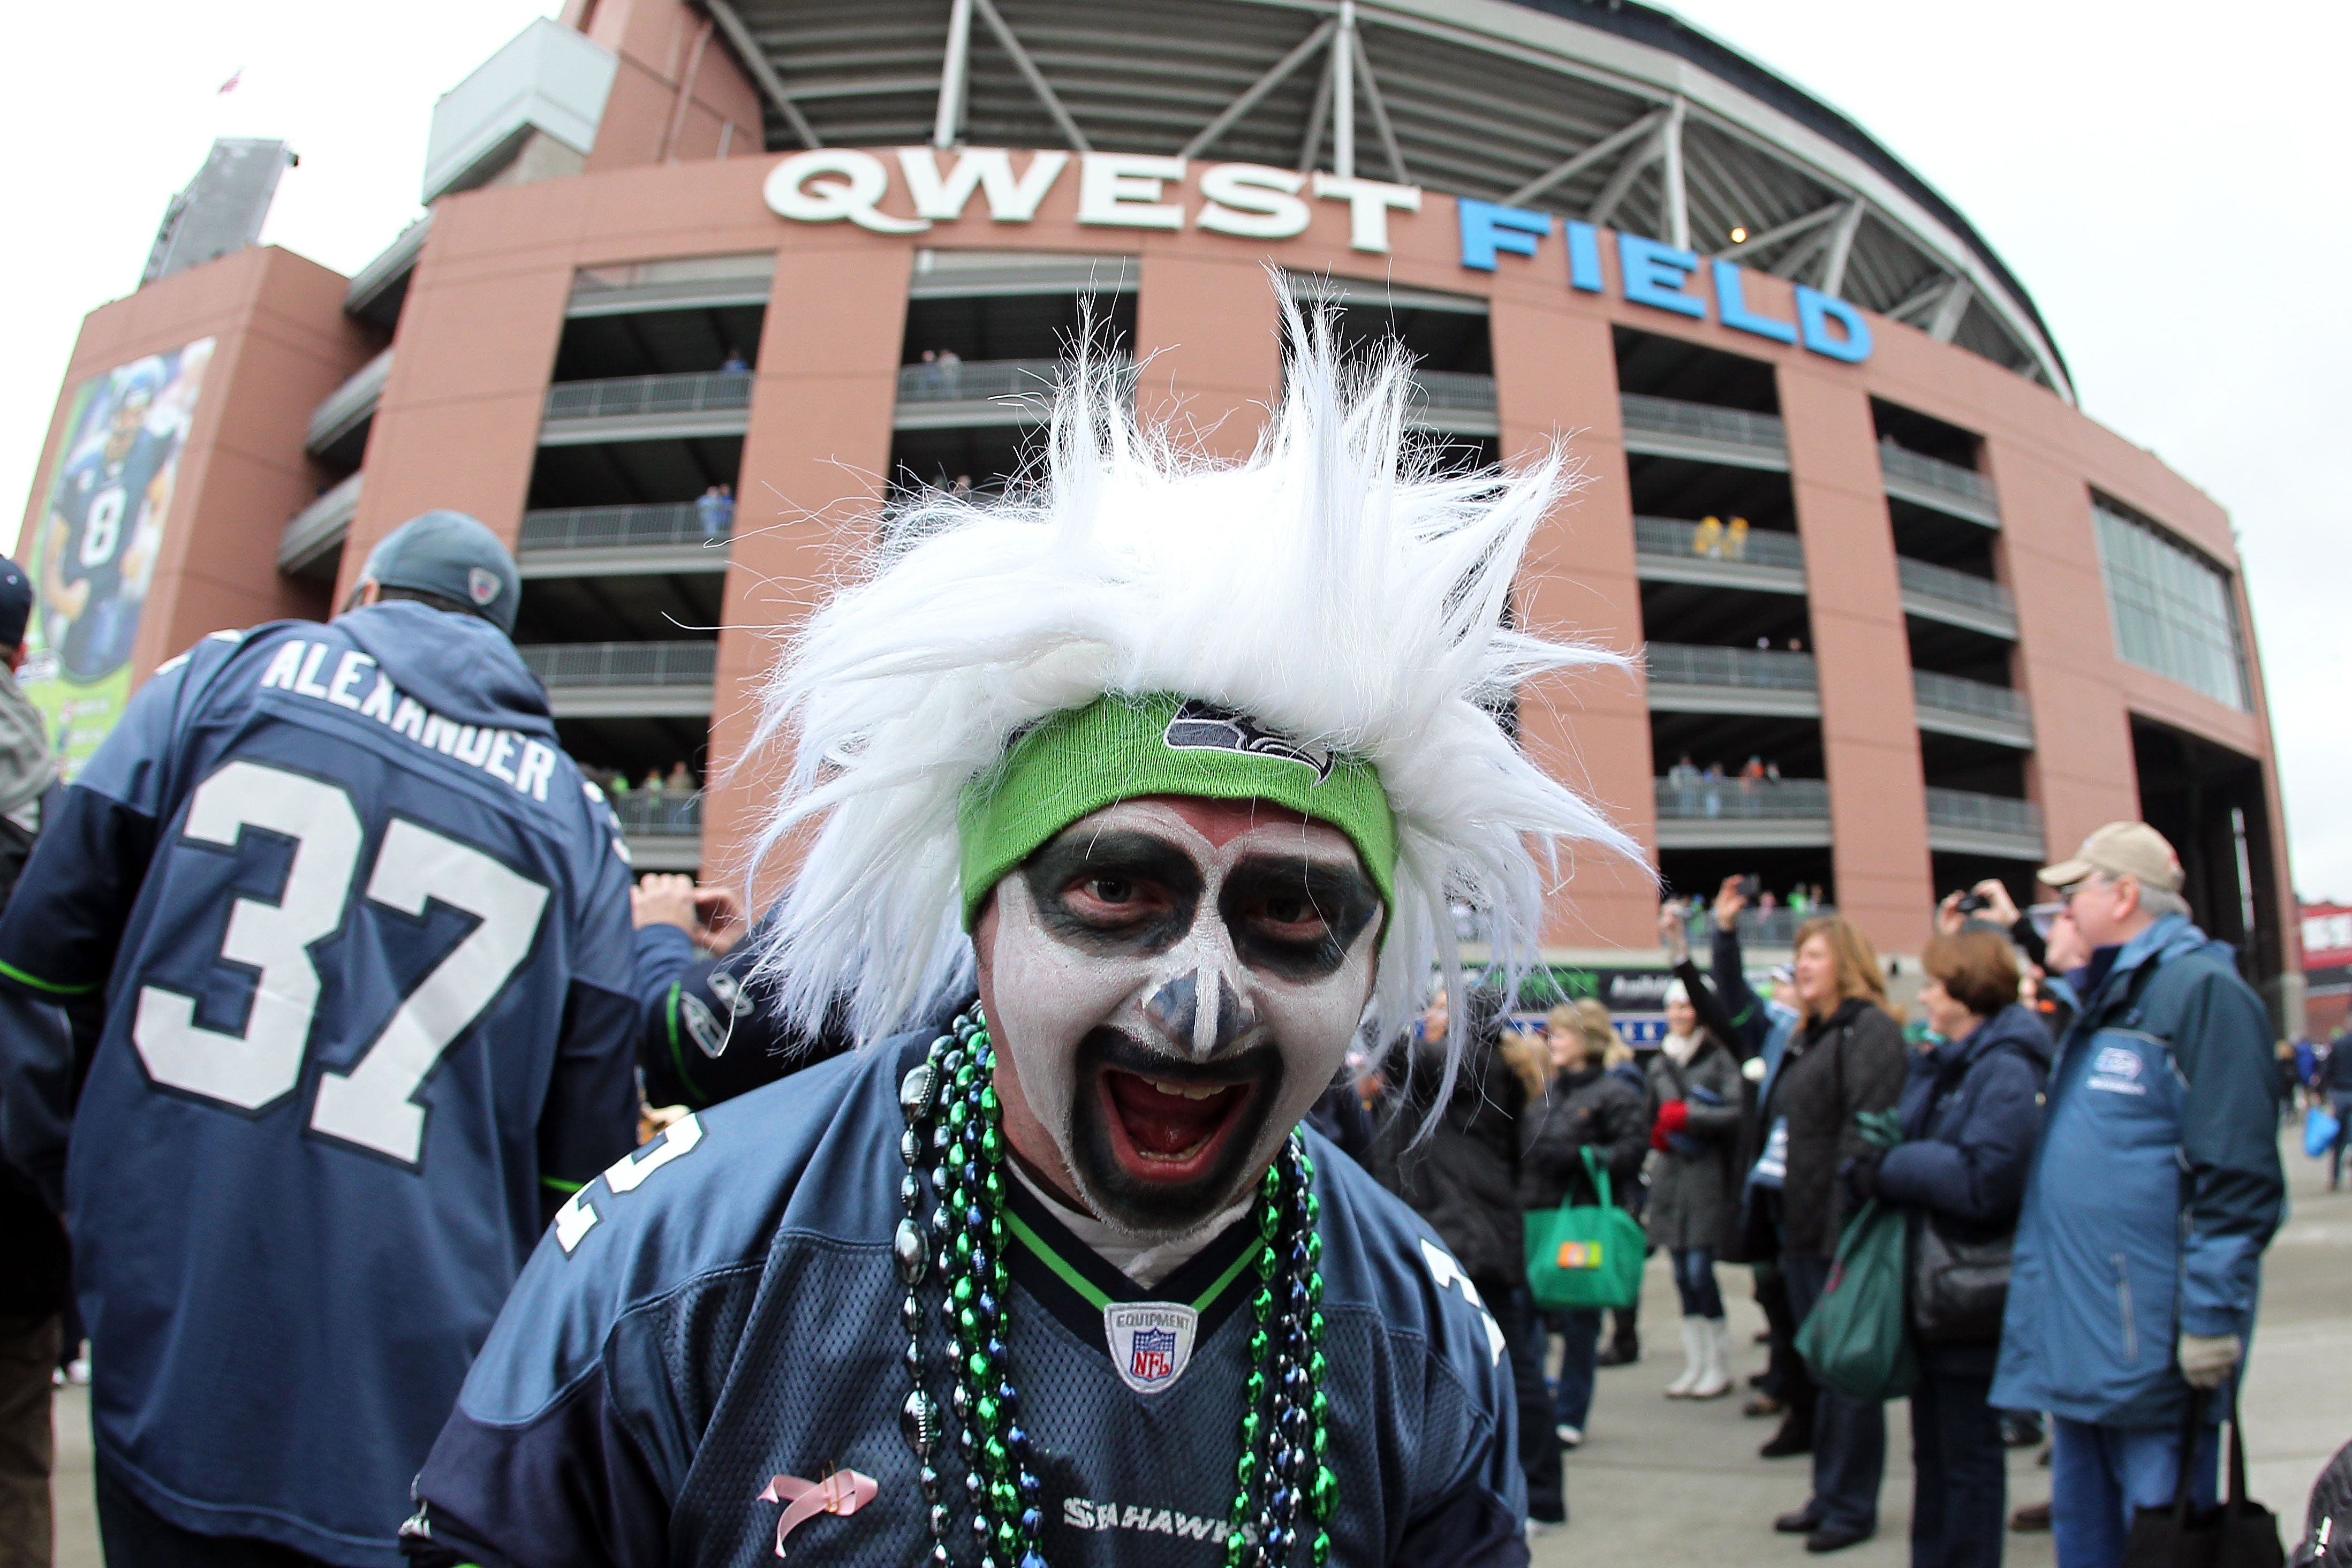 SEATTLE, WA - JANUARY 08:  A Seattle Seahawks fan poses outside Qwest Field before the Seahawks take on the New Orleans Saints in the 2011 NFC wild-card playoff game on January 8, 2011 in Seattle, Washington.  (Photo by Otto Greule Jr/Getty Images)